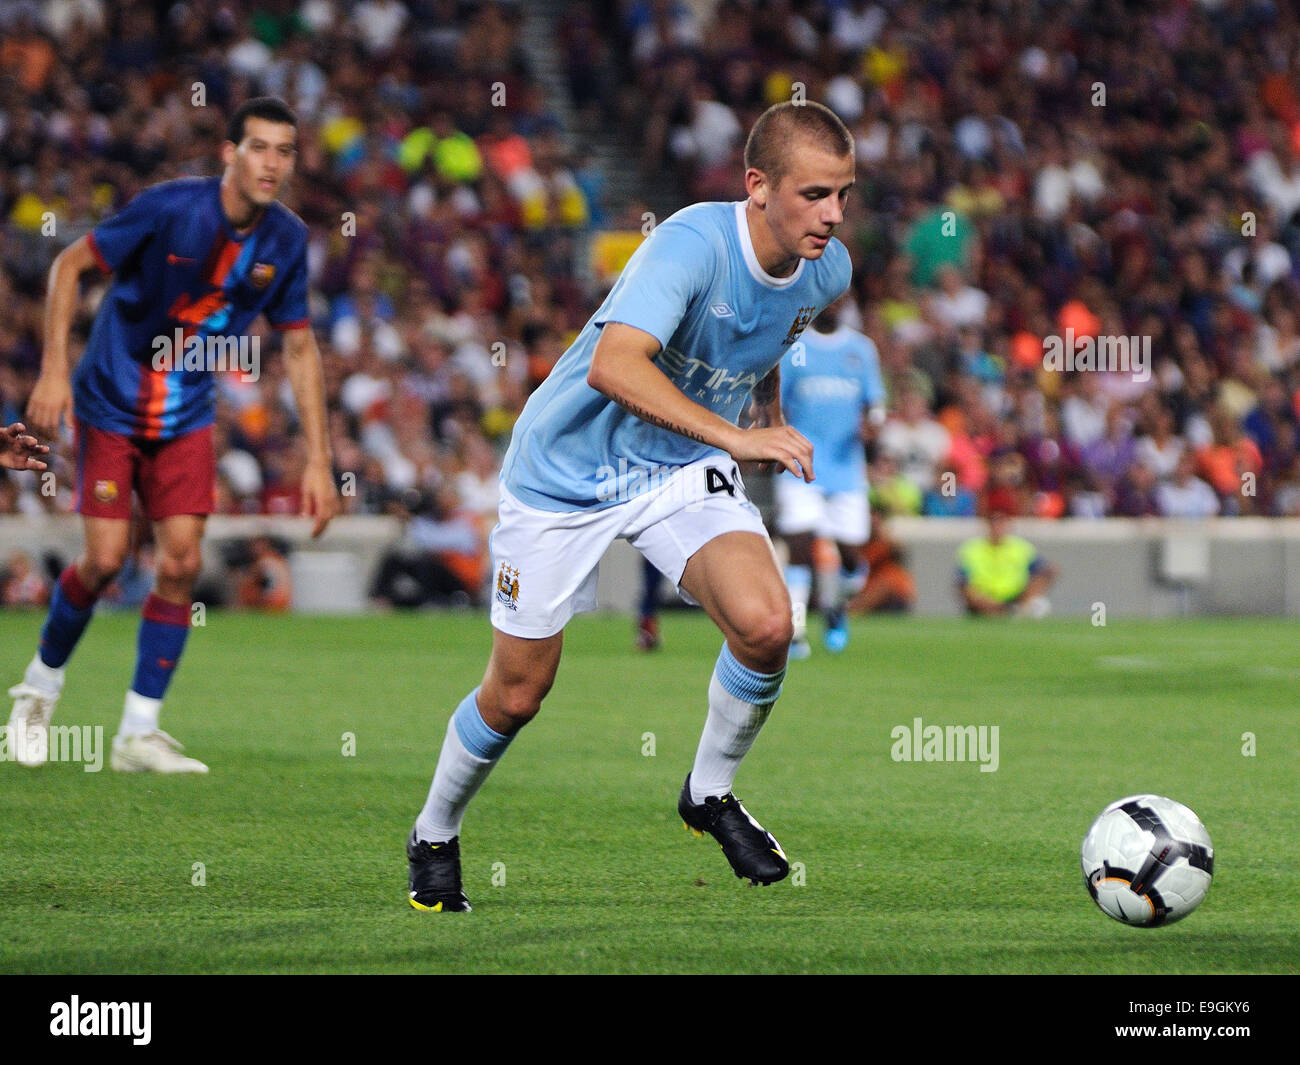 BARCELONA, SPAIN - AUG 19: Vladimir Weiss, Manchester City player, plays against Barcelona. Joan Gamper Throphy at the Camp Nou. Stock Photo